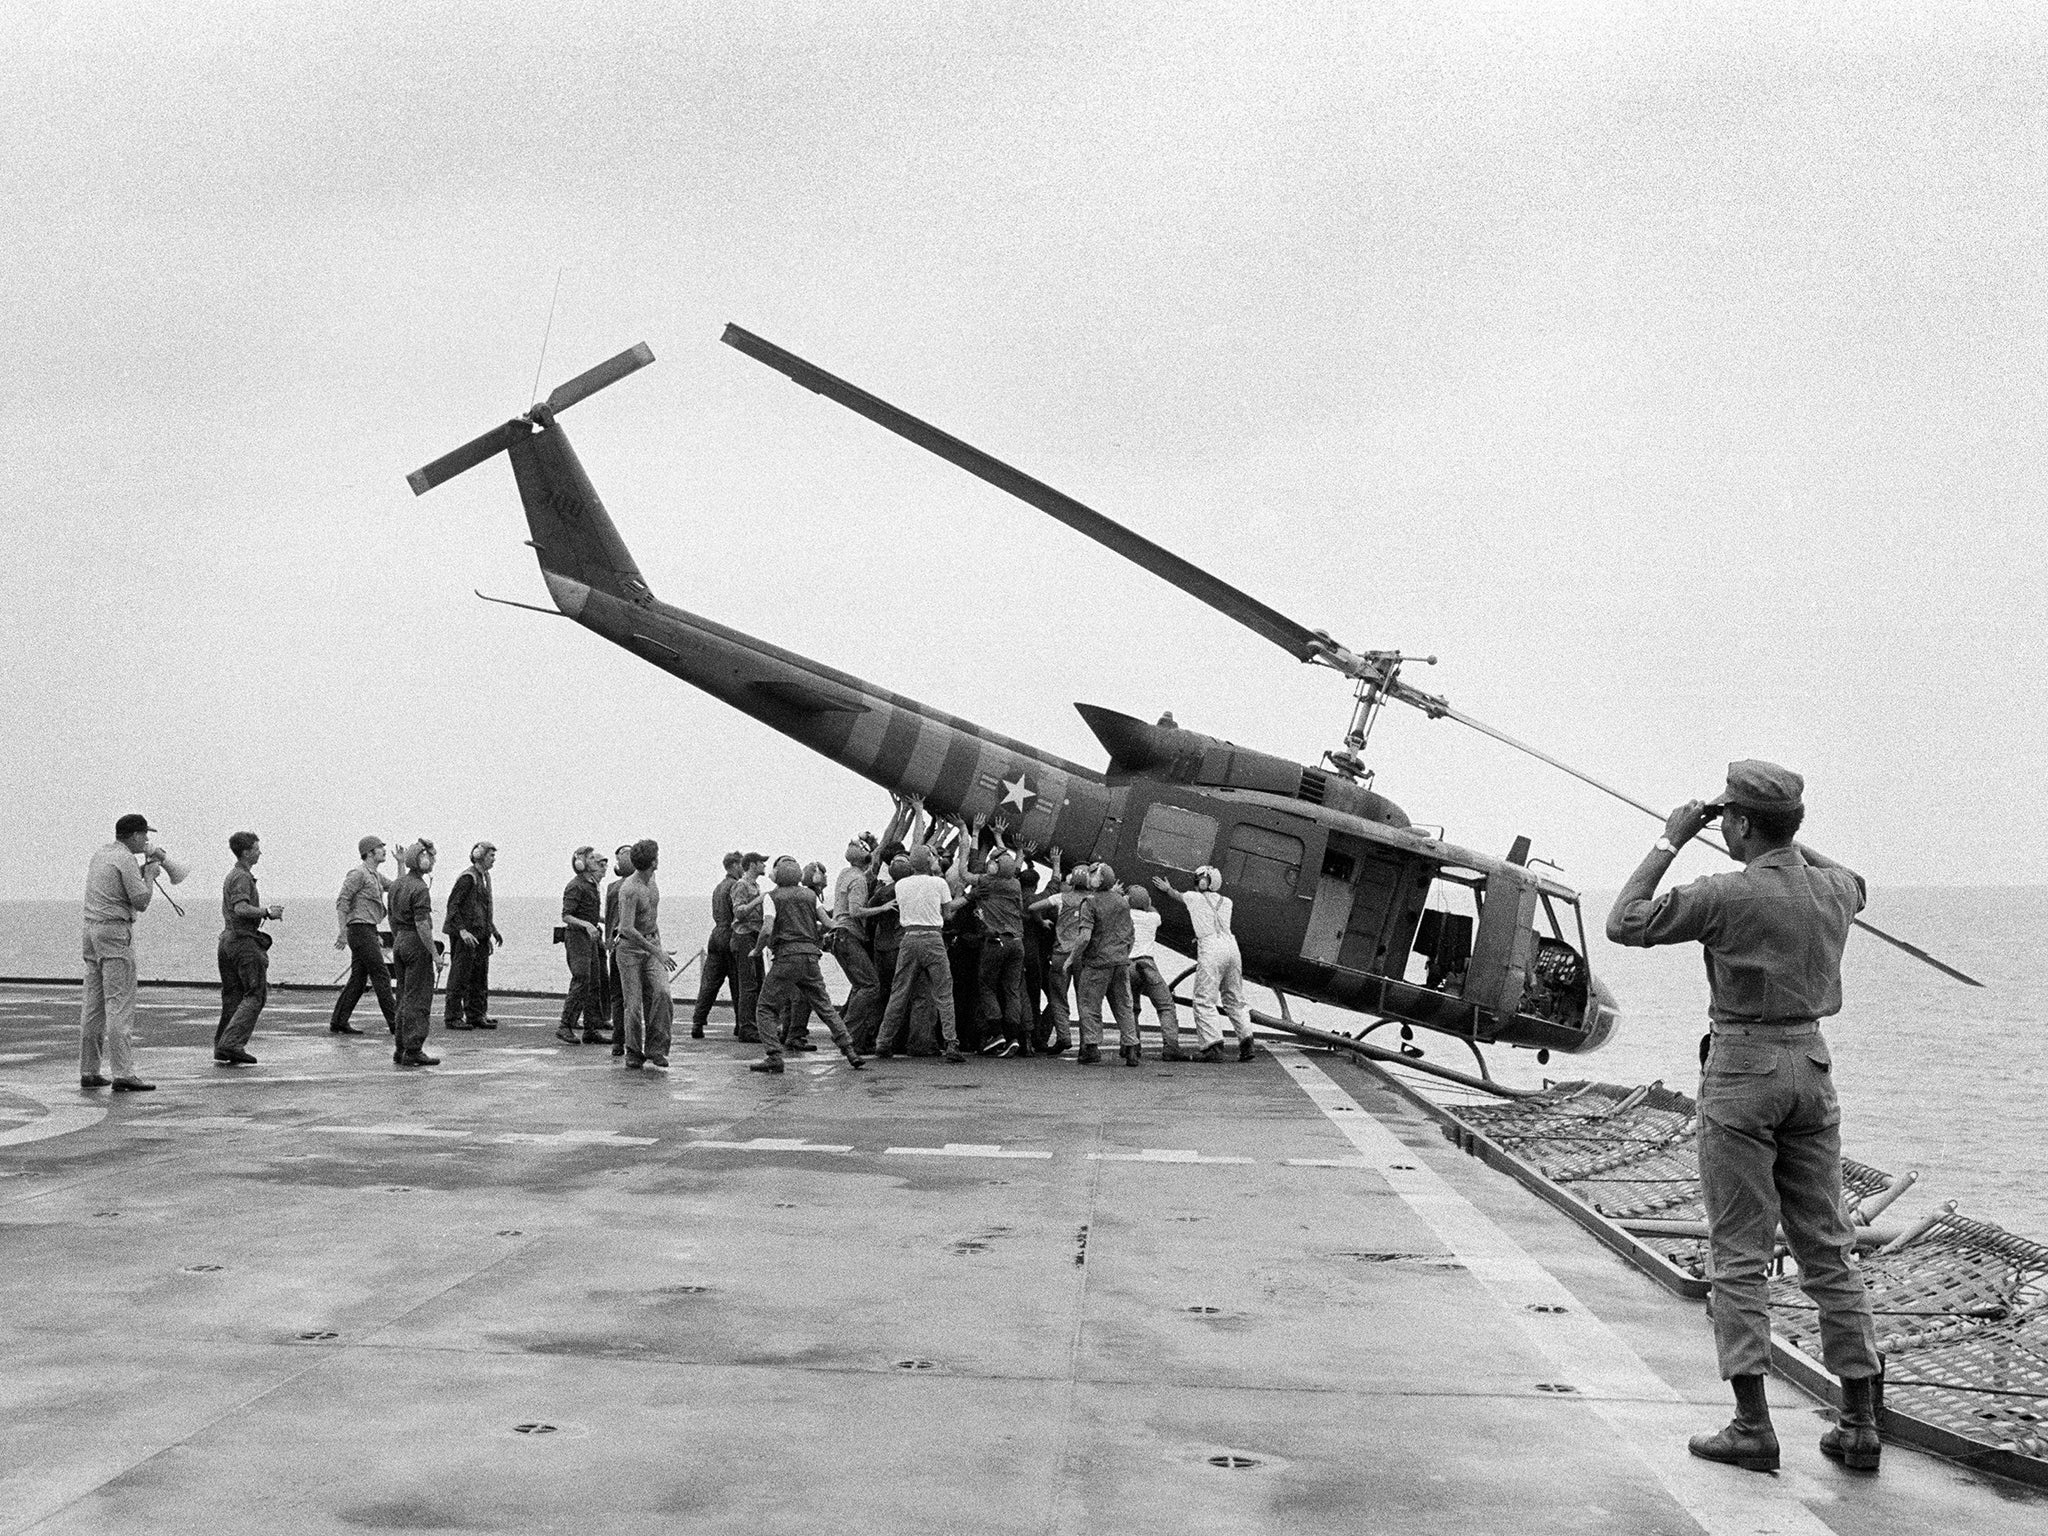 US Navy personnel aboard the USS Blue Ridge push a helicopter into the sea in order to make room for more evacuation flights from Saigon (AP)